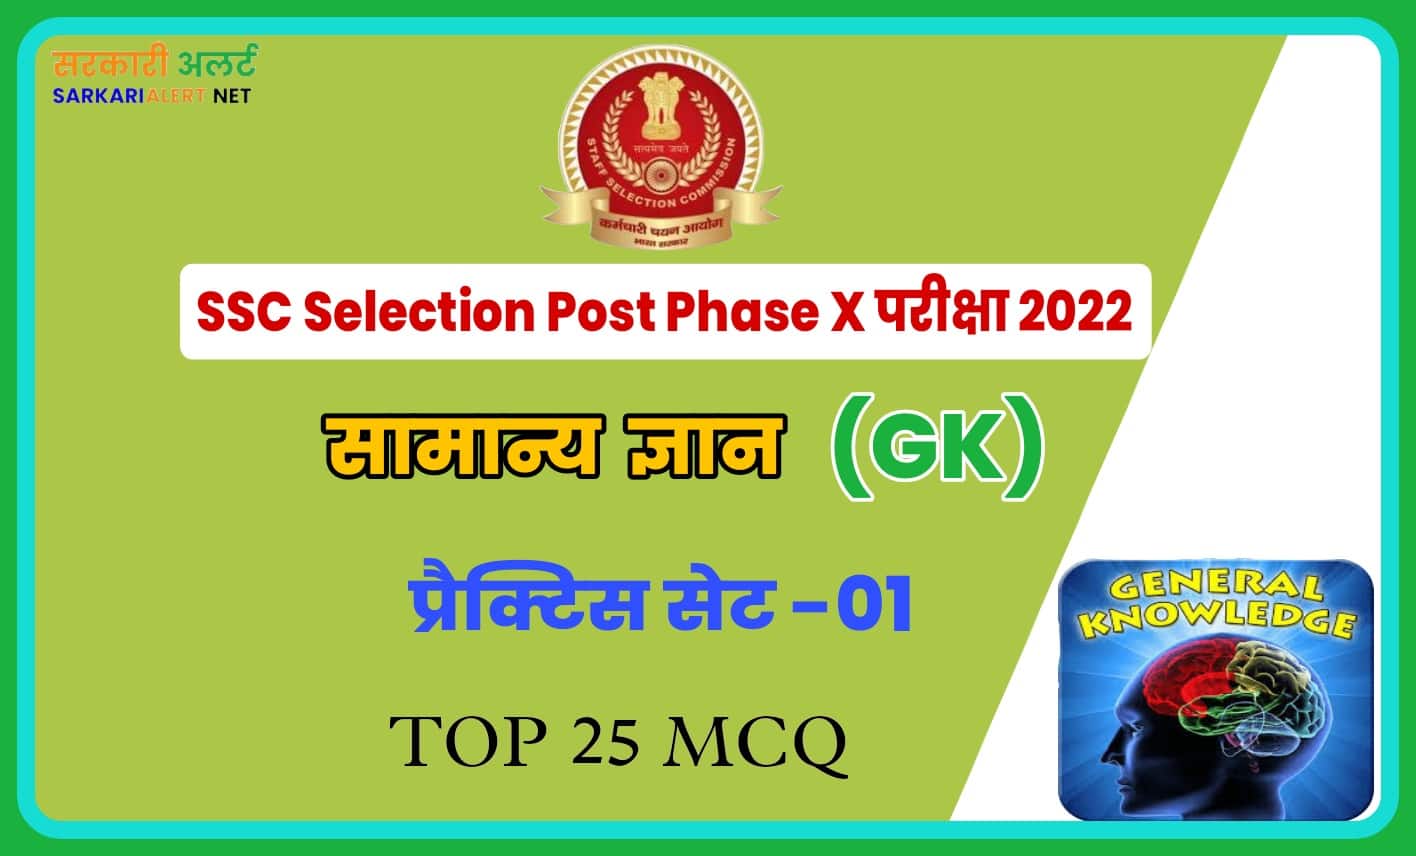 SSC Selection Post Phase X General knowledge Practice Set 01